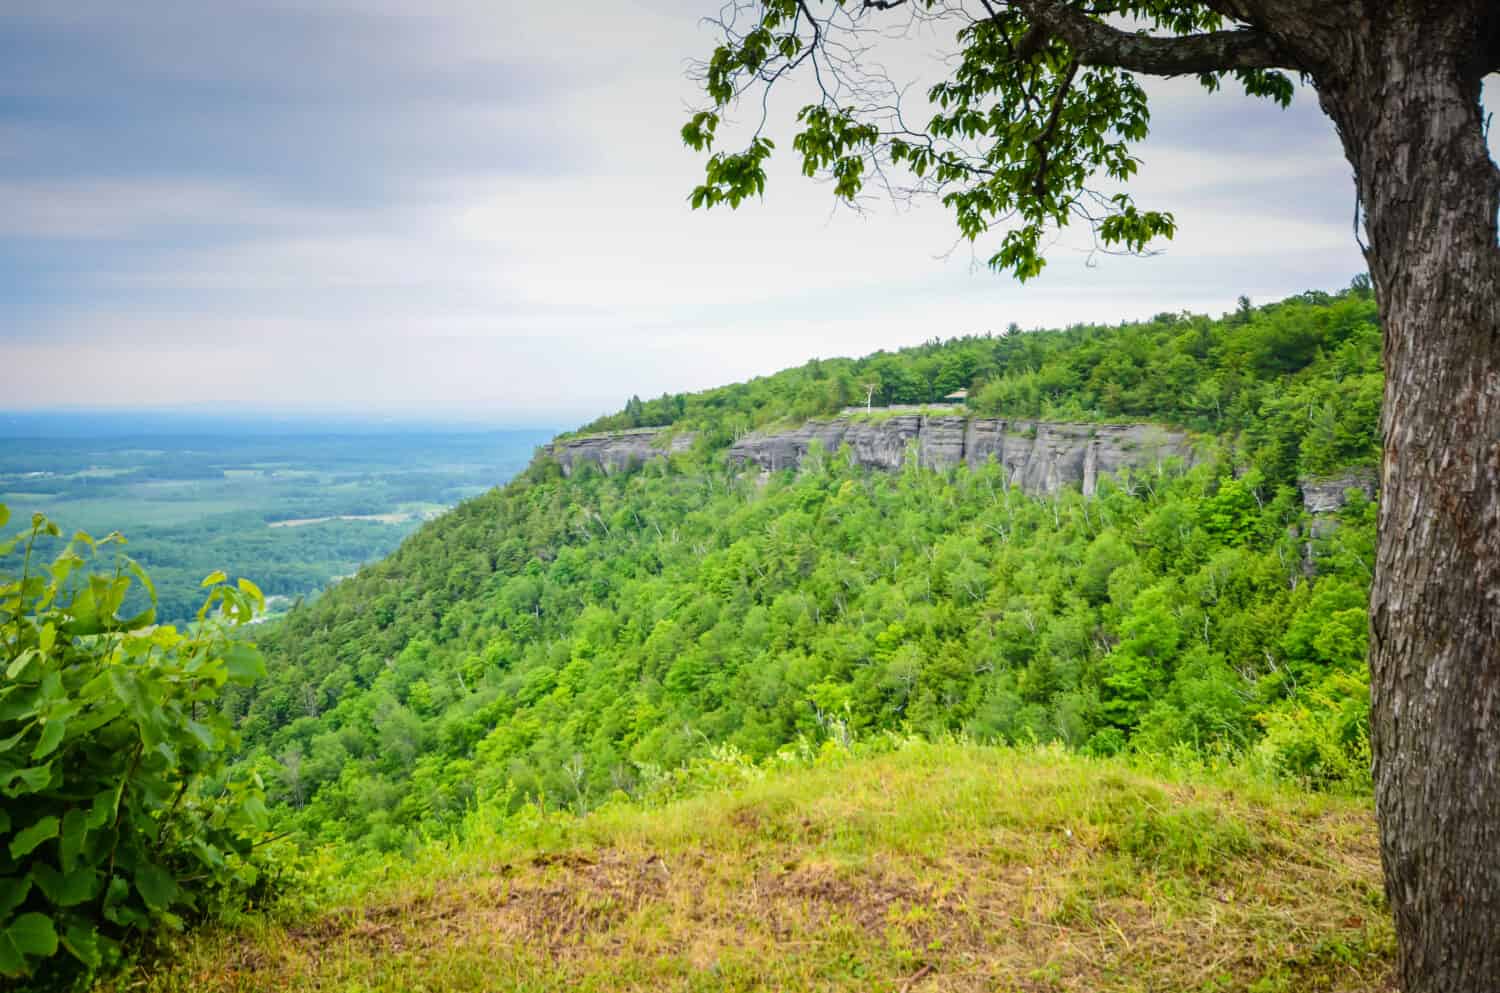 Scenic overview of Hedelberg cliffs seen at John Boyd Thacher State Park in Voorheesville, New York.